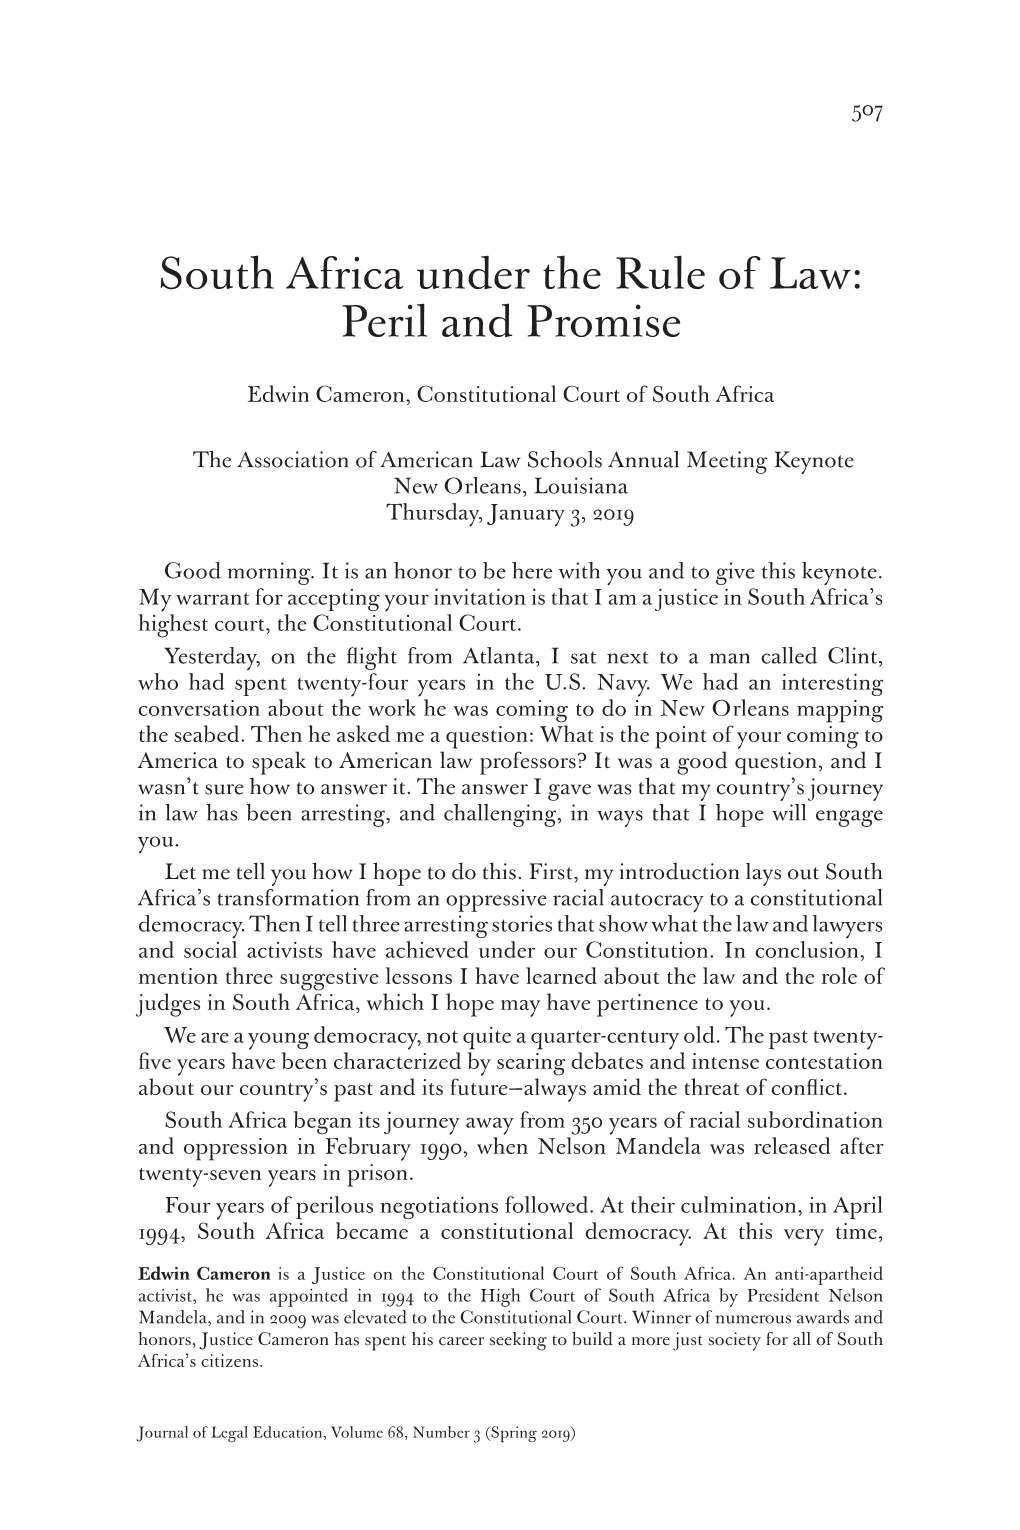 South Africa Under the Rule of Law: Peril and Promise